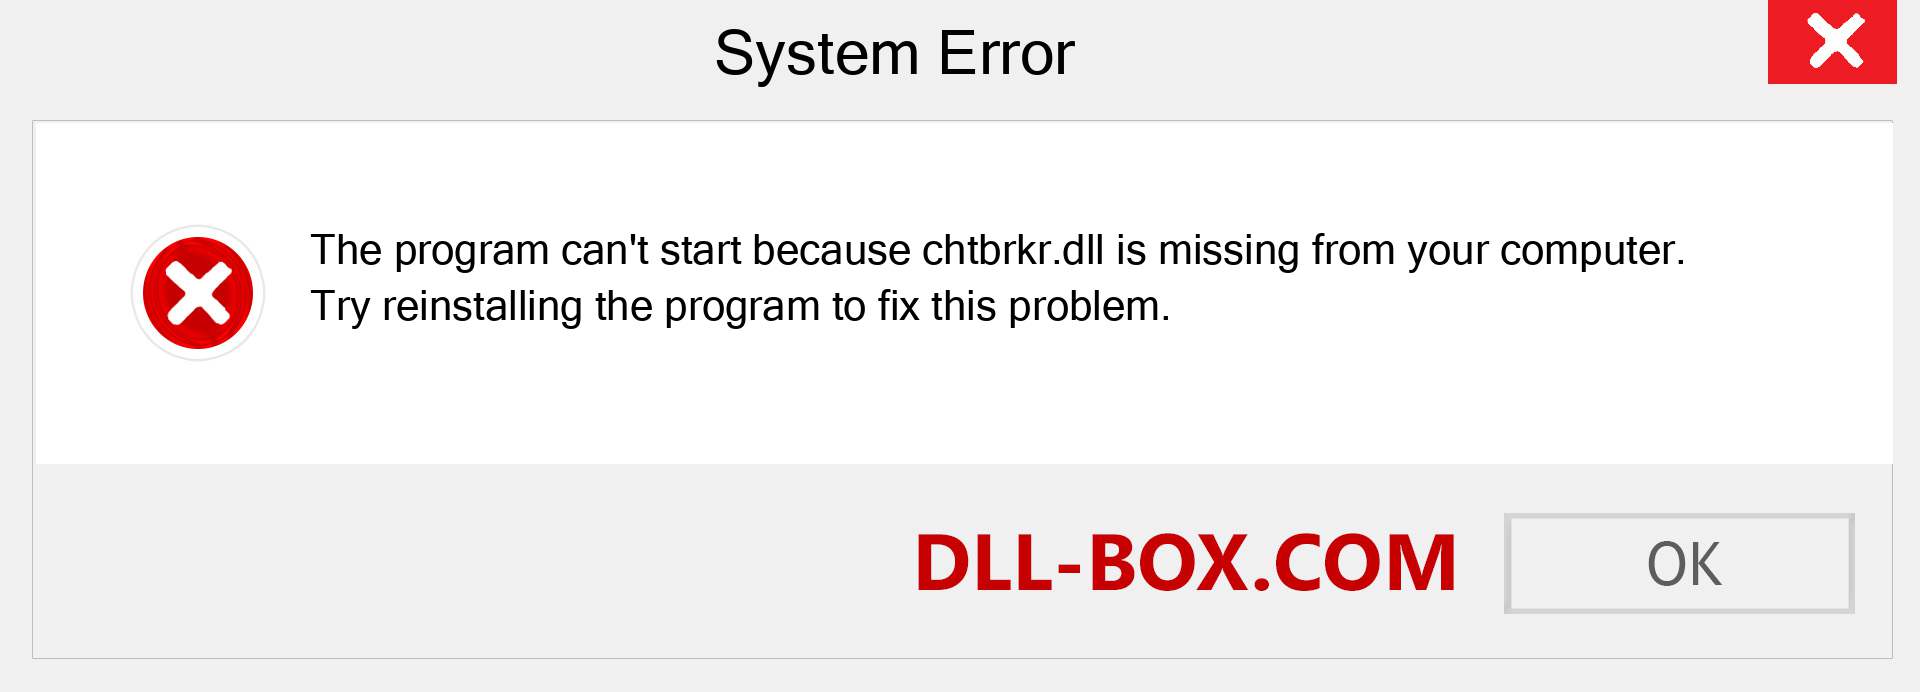  chtbrkr.dll file is missing?. Download for Windows 7, 8, 10 - Fix  chtbrkr dll Missing Error on Windows, photos, images